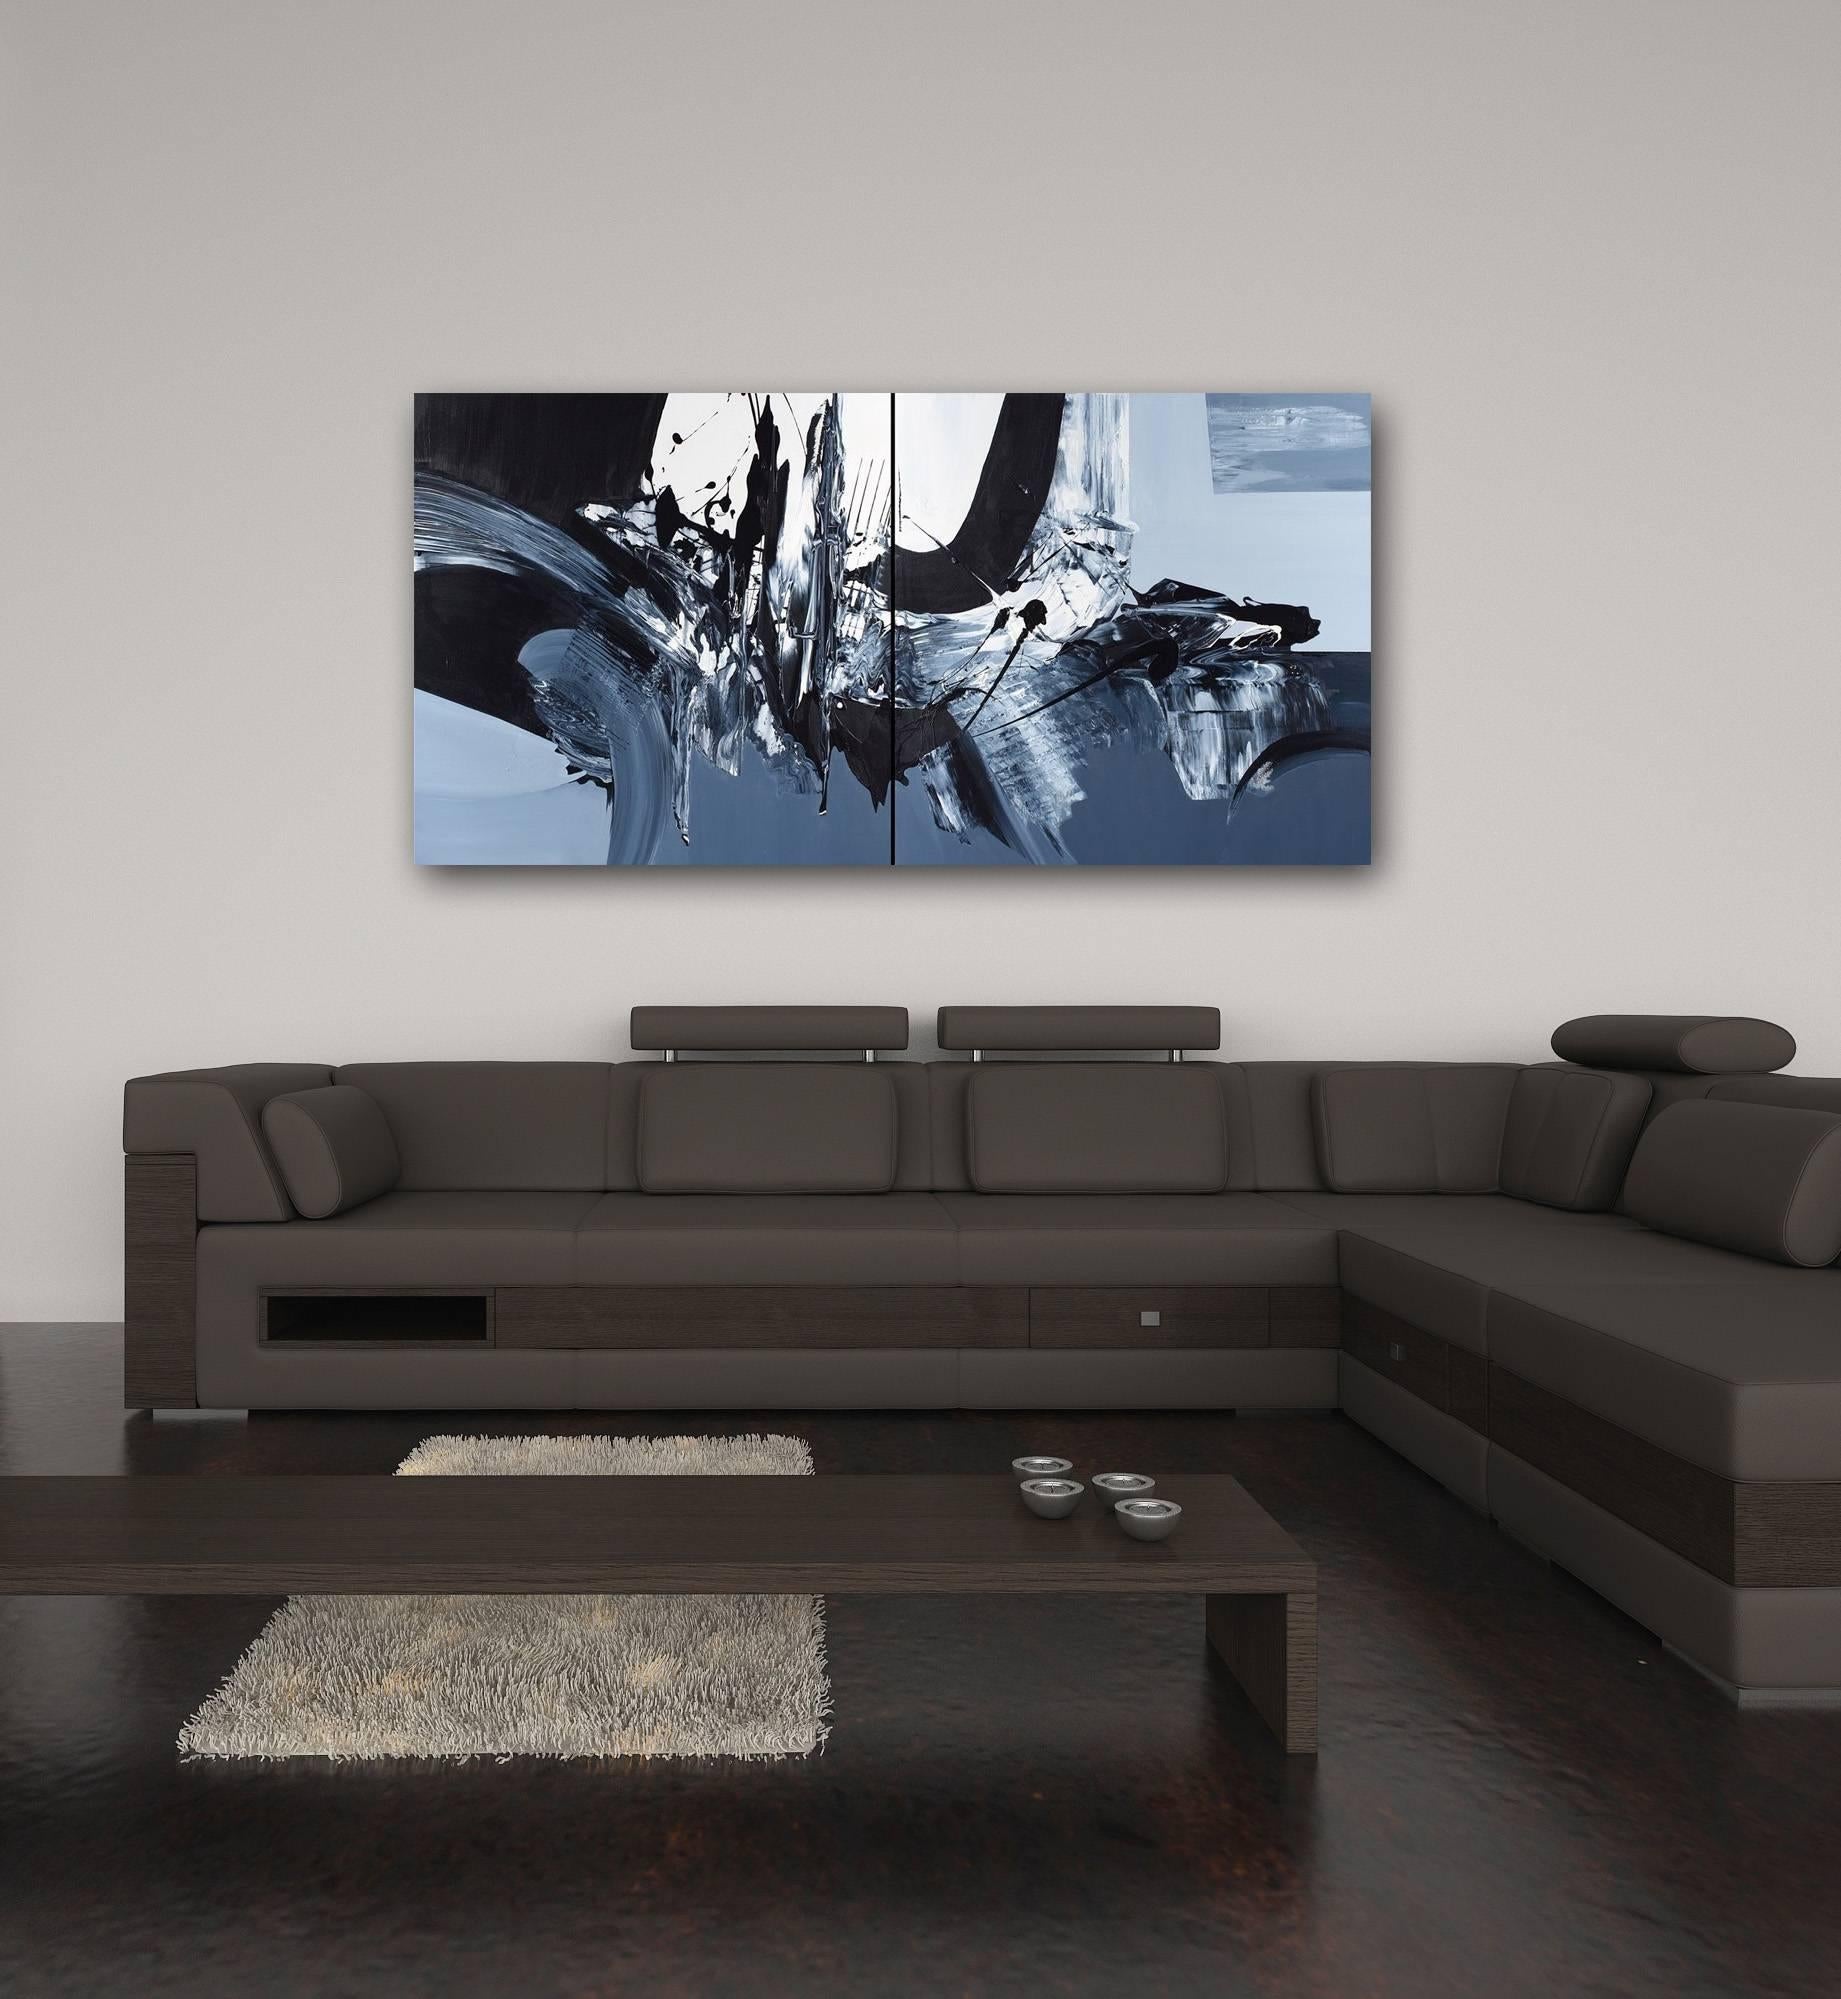 Revolves Around You (Diptych) - Large Scale Black and White Artwork - Painting by Gail Titus